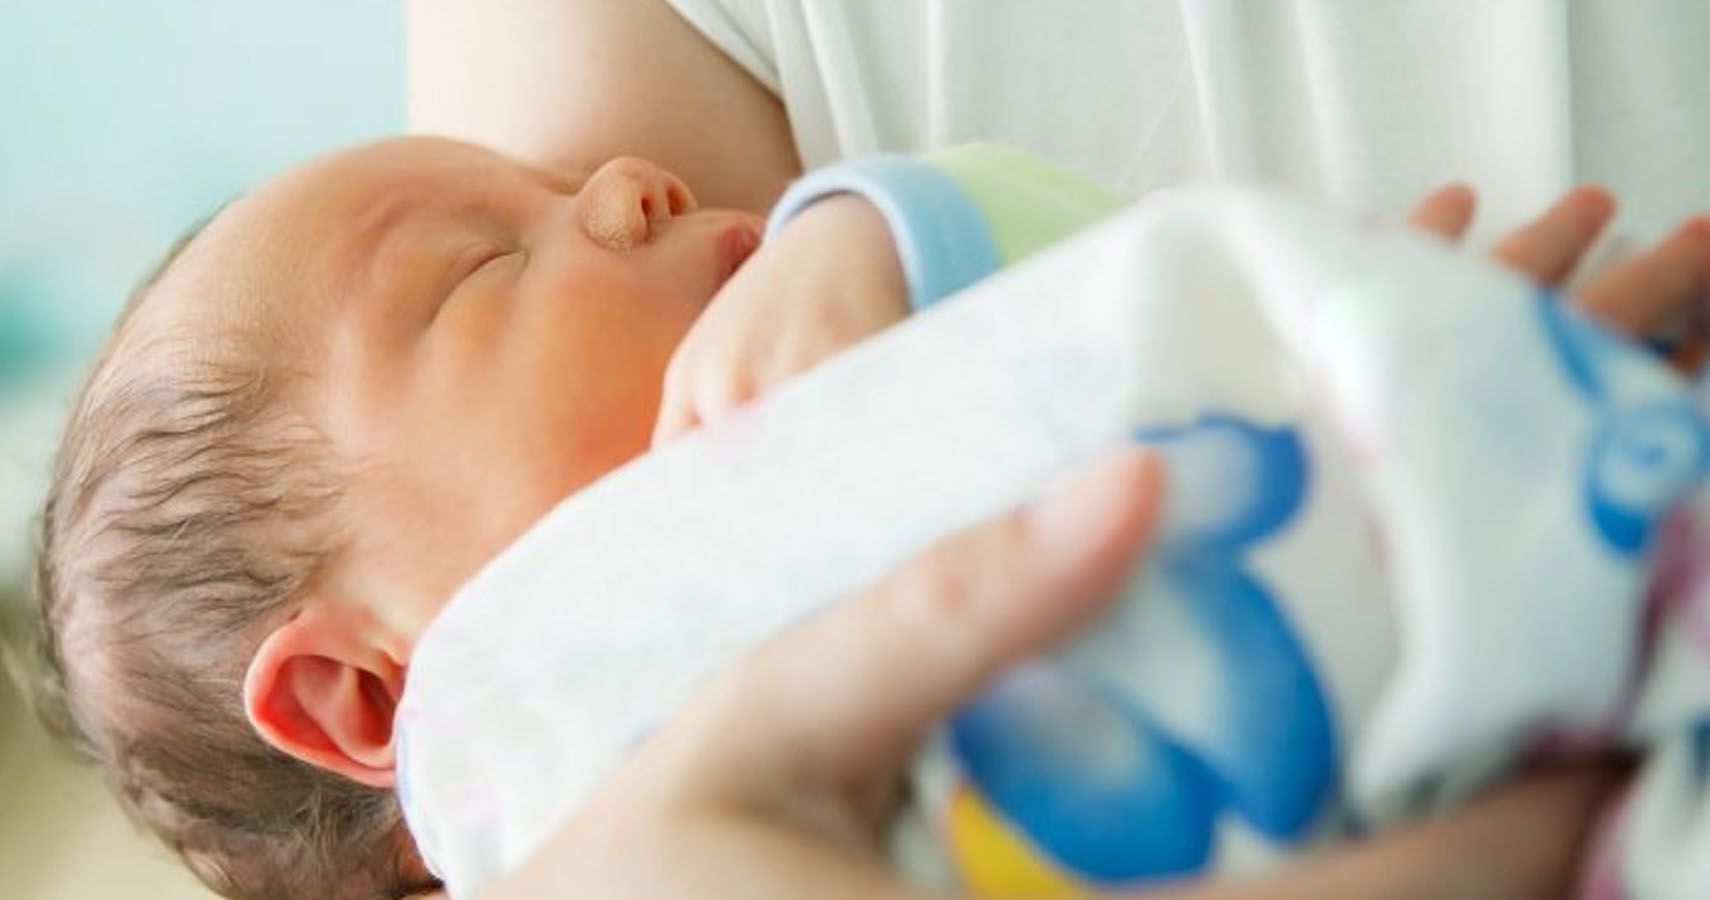 Can You Give Baby Virus Before Umbilical Cord Develops?